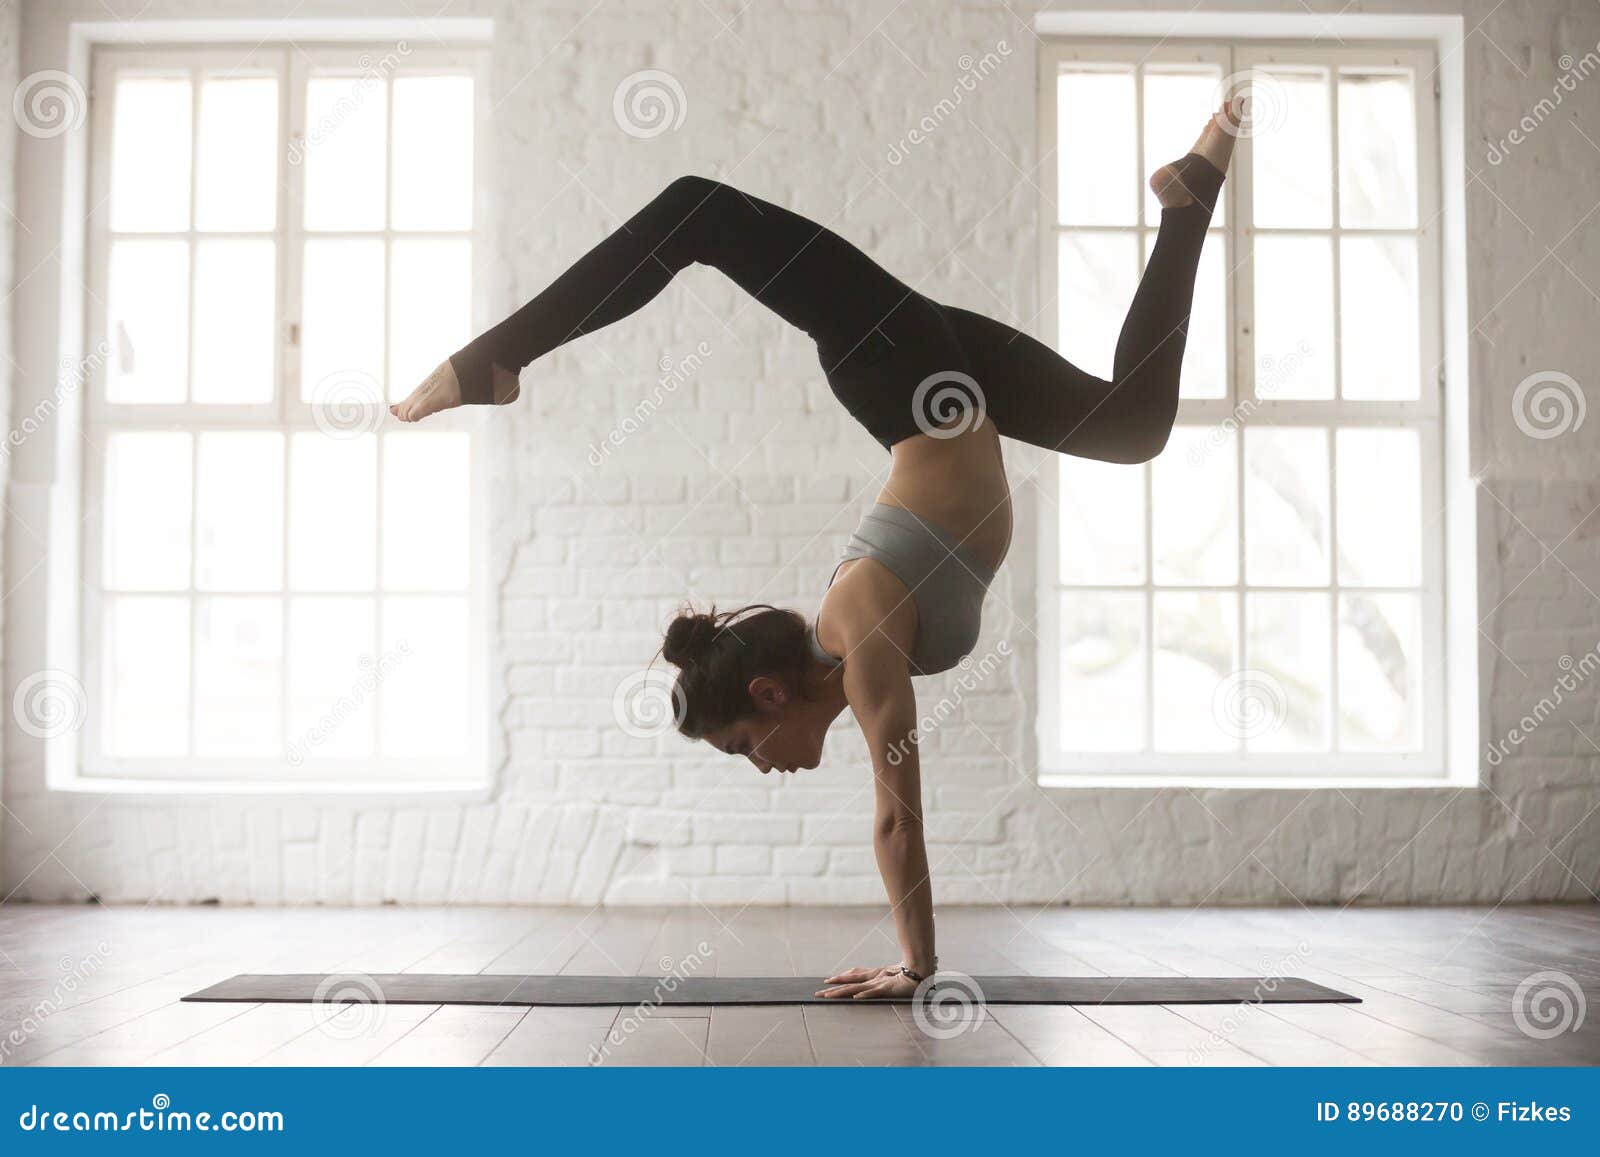 https://thumbs.dreamstime.com/z/young-attractive-woman-adho-mukha-vrksasana-pose-white-studi-silhouette-cool-yogi-practicing-yoga-concept-standing-exercise-89688270.jpg